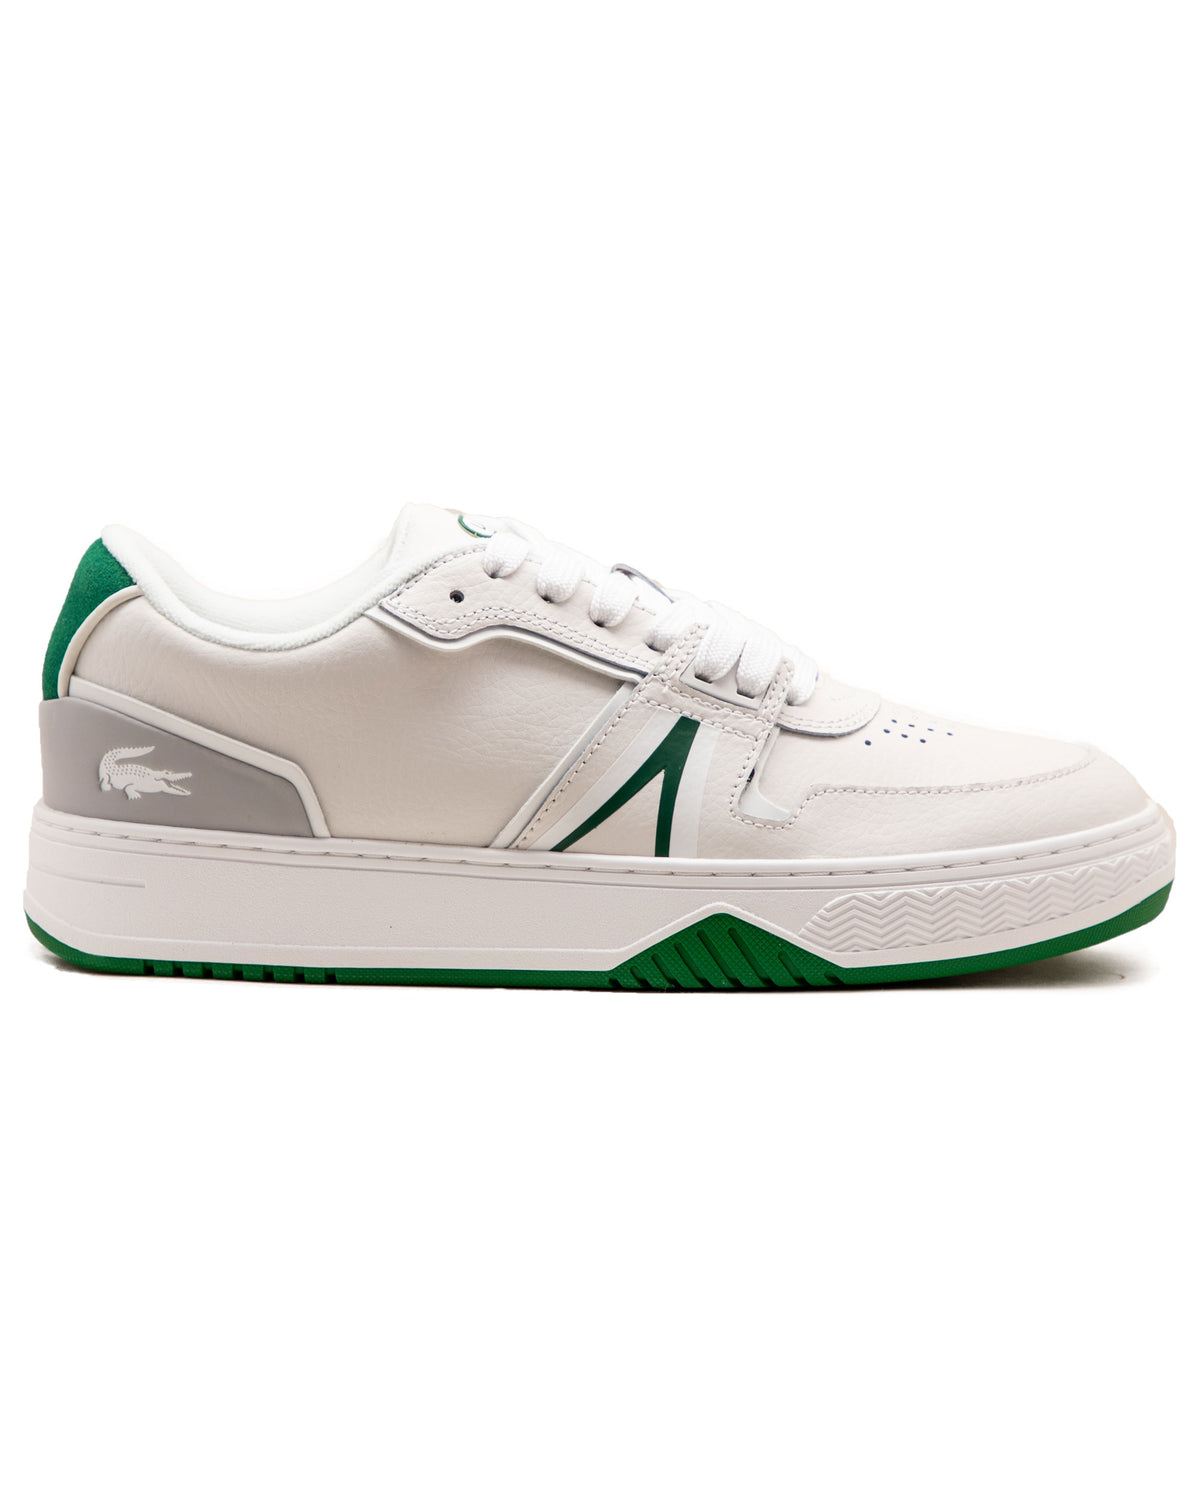 Sneakers Lacoste L001 White Green